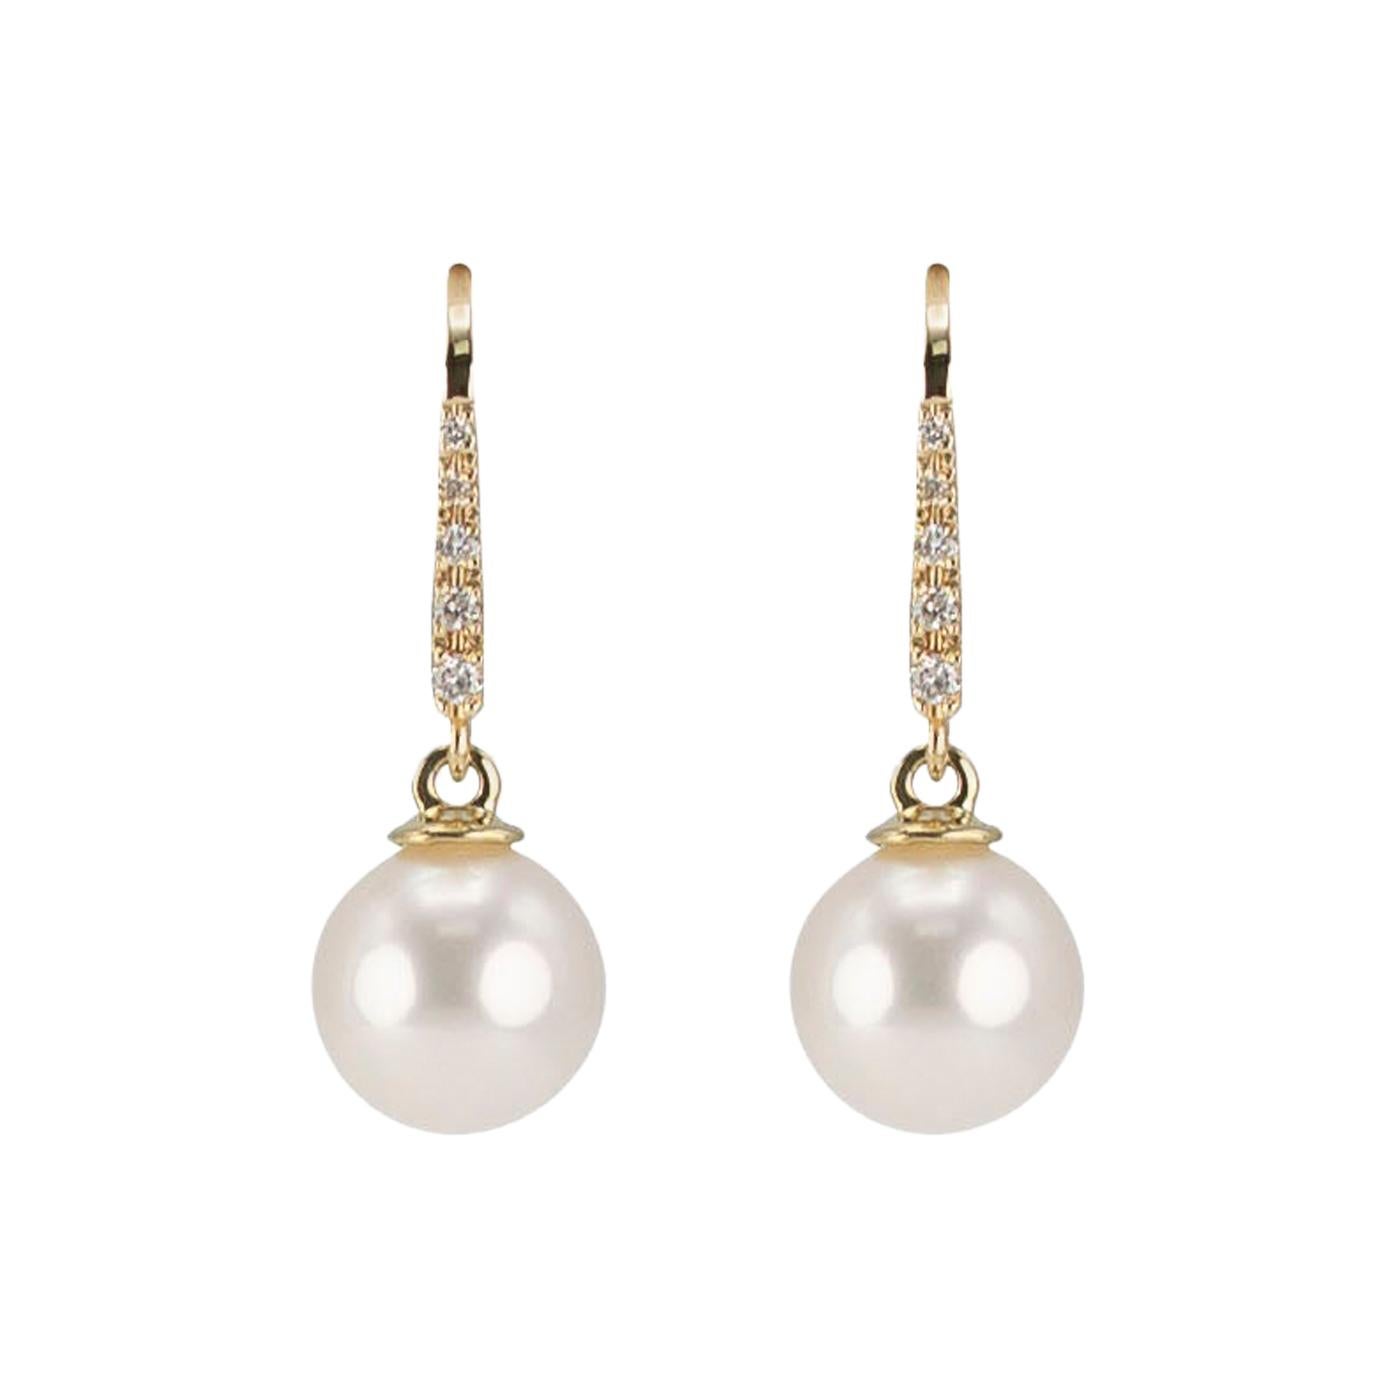 Be the belle of any ball with these stunningly romantic pure white cultured pearl earrings. Each dangle earring features a lustrous pure white genuine cultured freshwater pearl in a perfectly round shape. Each pearl drop hangs below a line of five